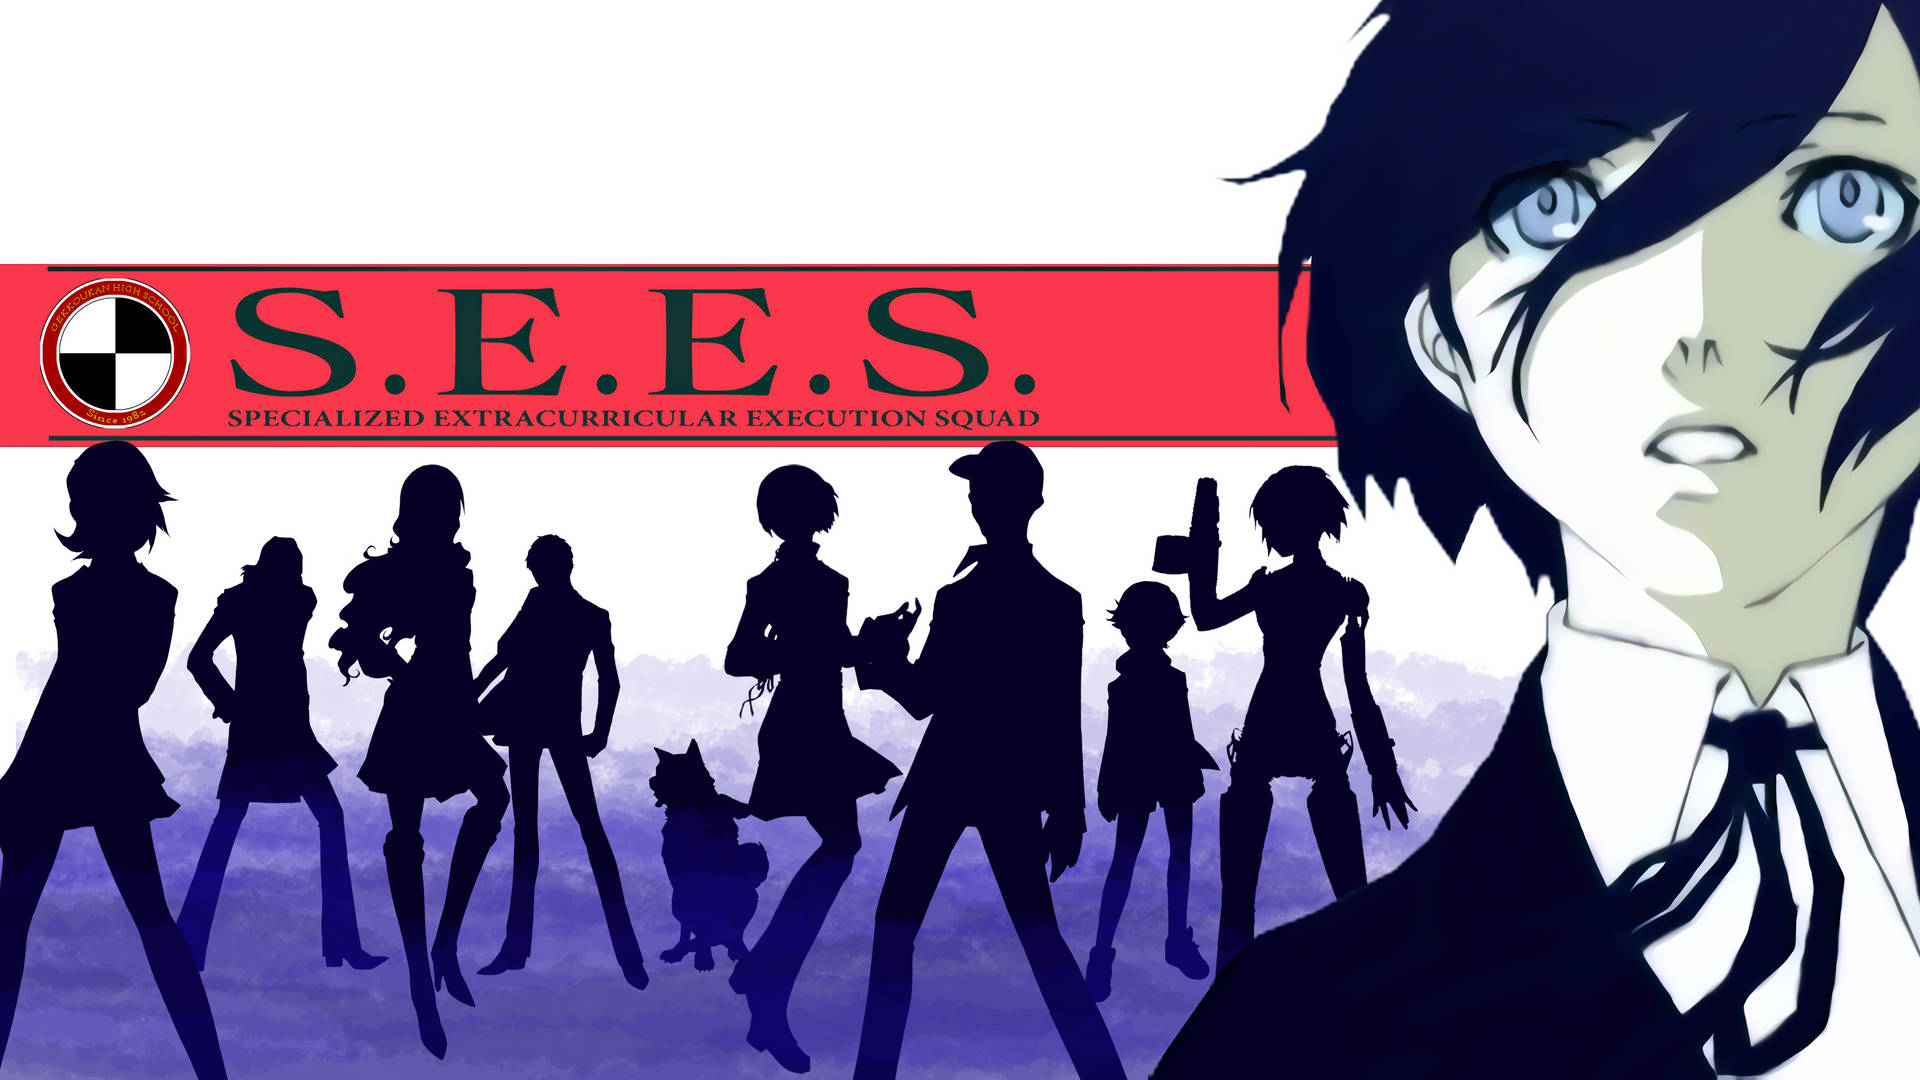 “The Specialized Extracurricular Execution Squad from Persona 3” Wallpaper